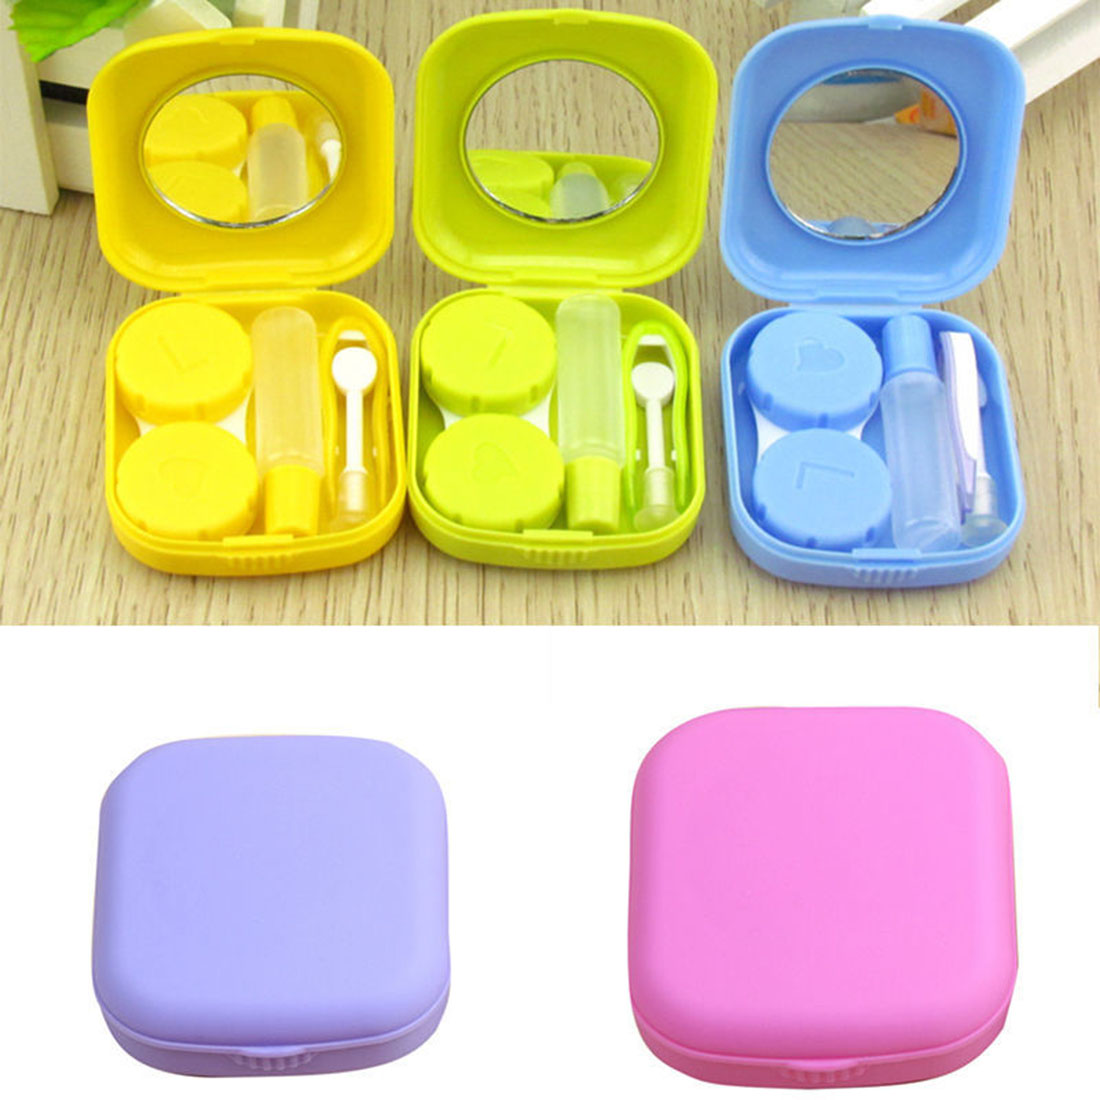 5 Colors Cute Pocket Mini Square Contact Lens Case Box Travel Kit Easy Carry Mirror Container Eyewear Accessories